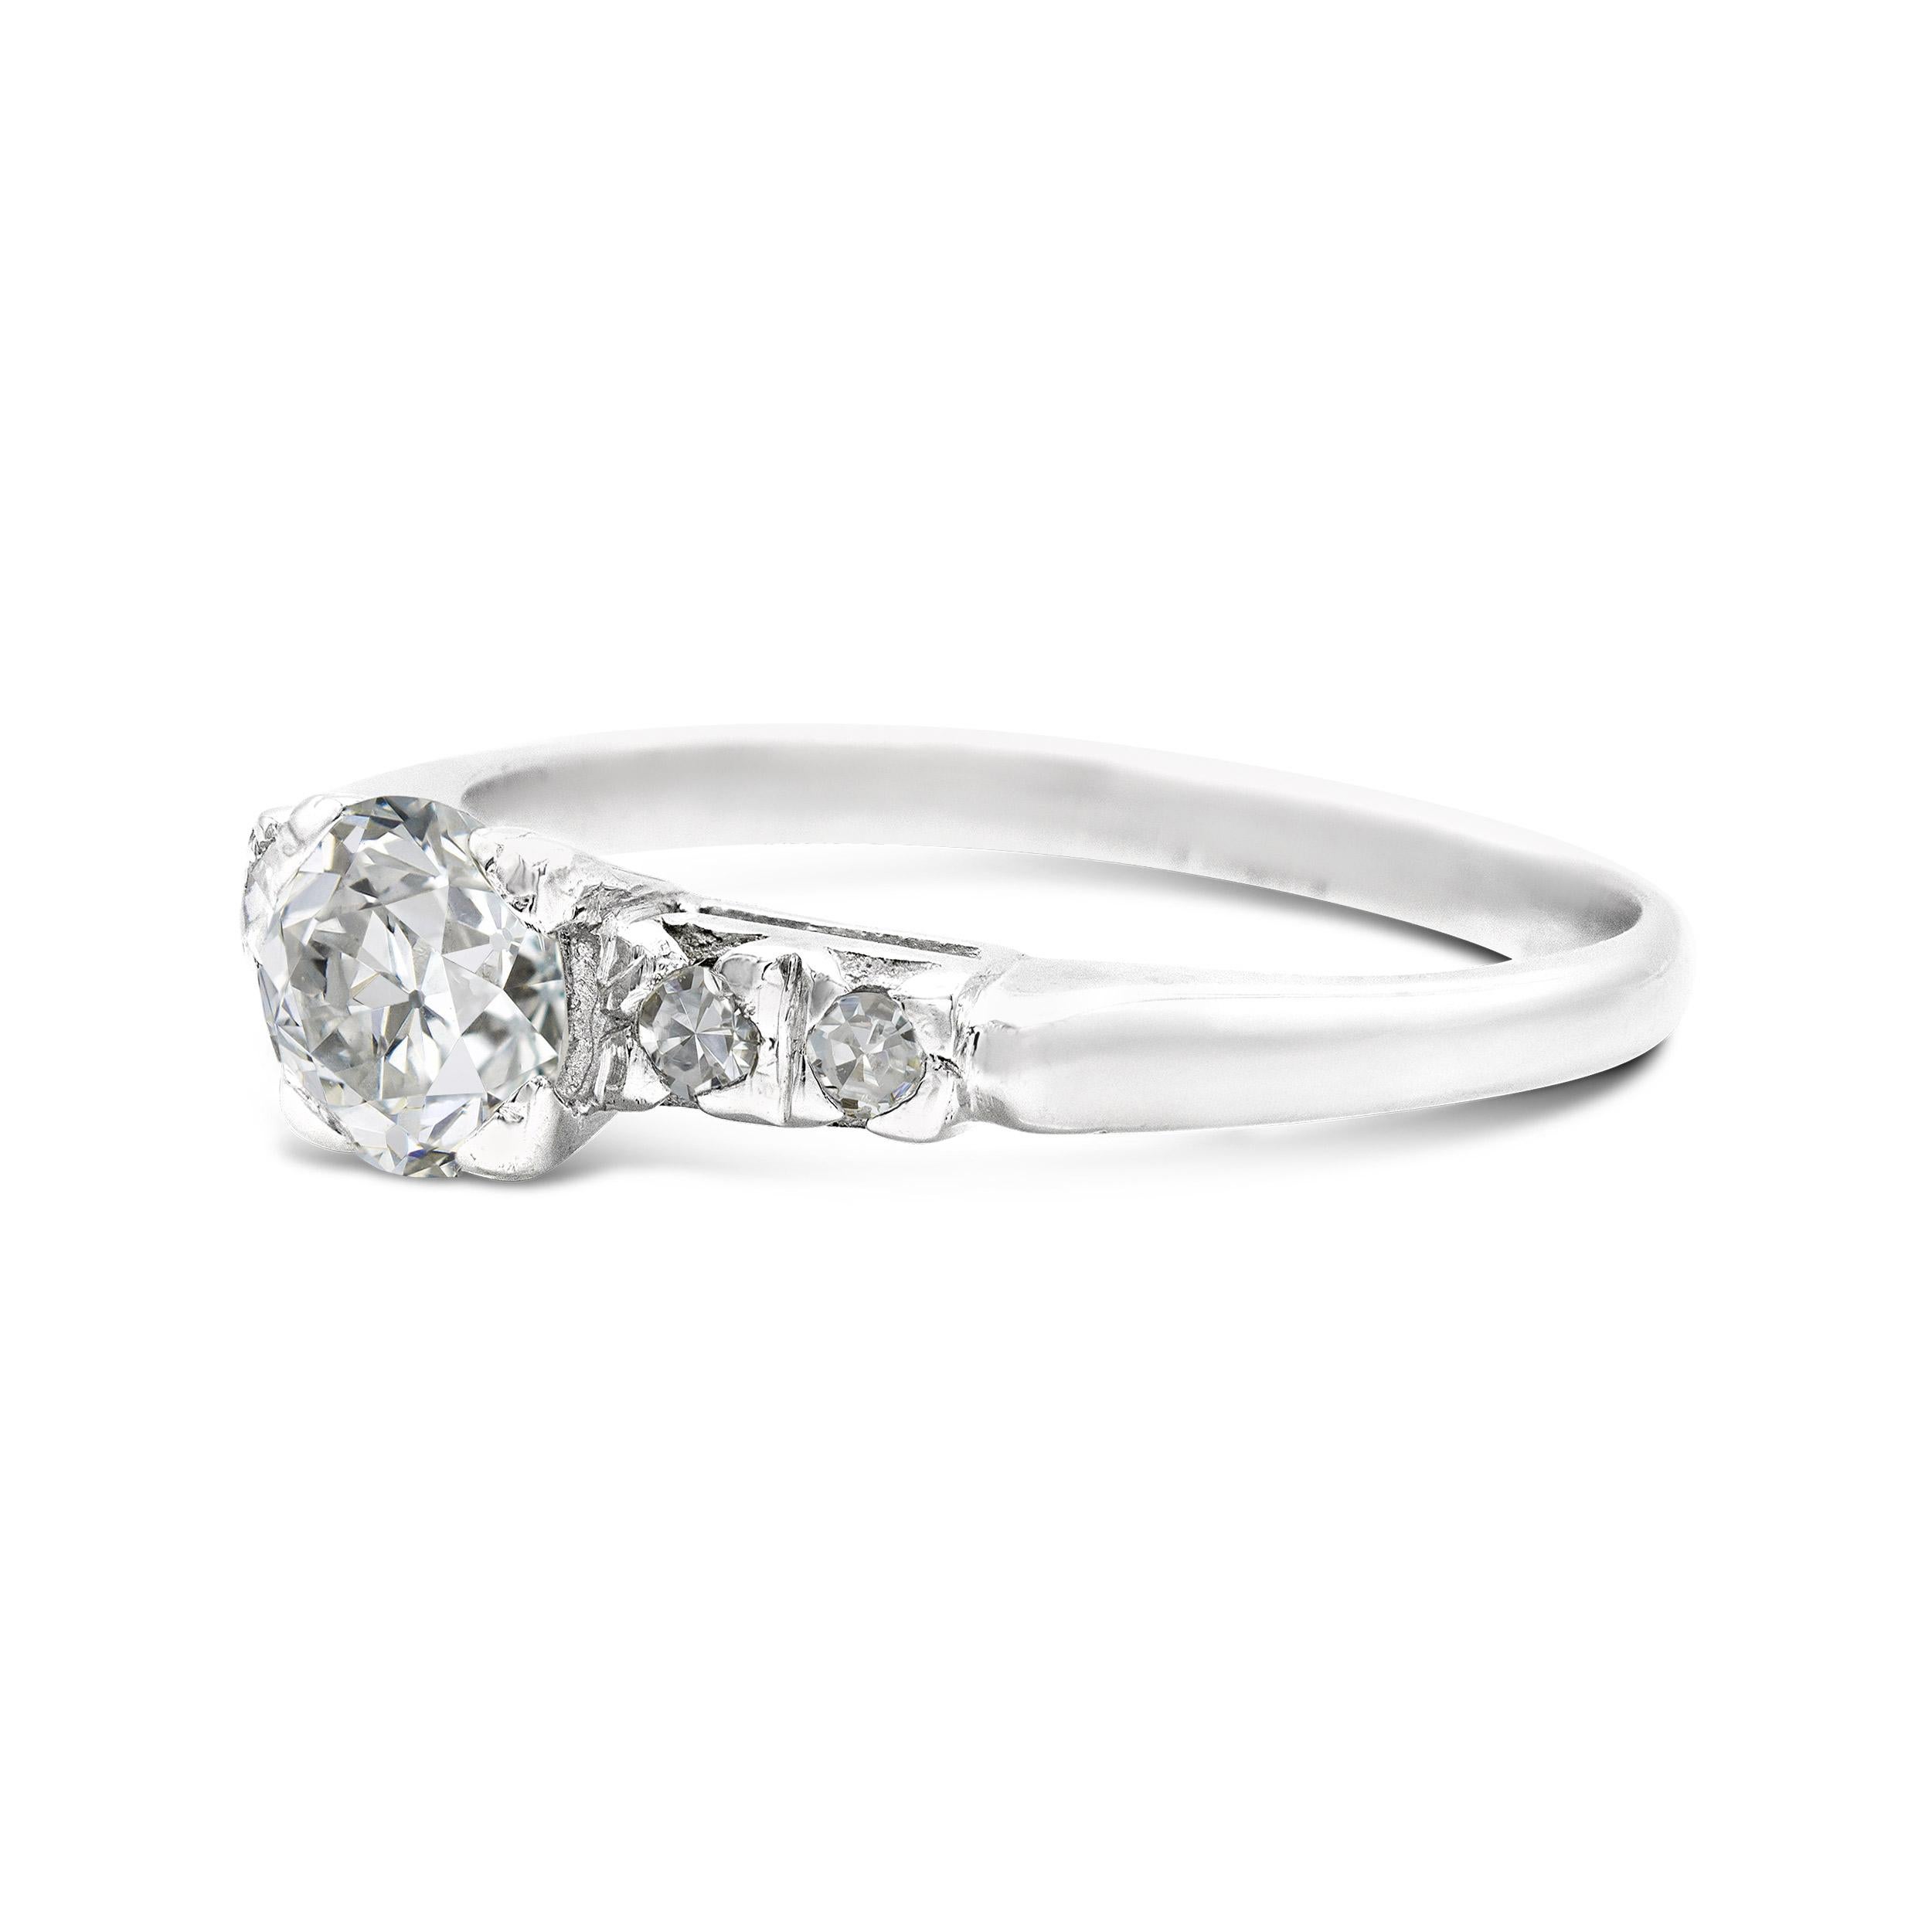 A charming Deco-era engagement ring that features all the things we love in a vintage diamond. The center diamond's visible culet and flowery facets give this classic ring style a distinctive old-world look. Single cut shoulder accents pierced in